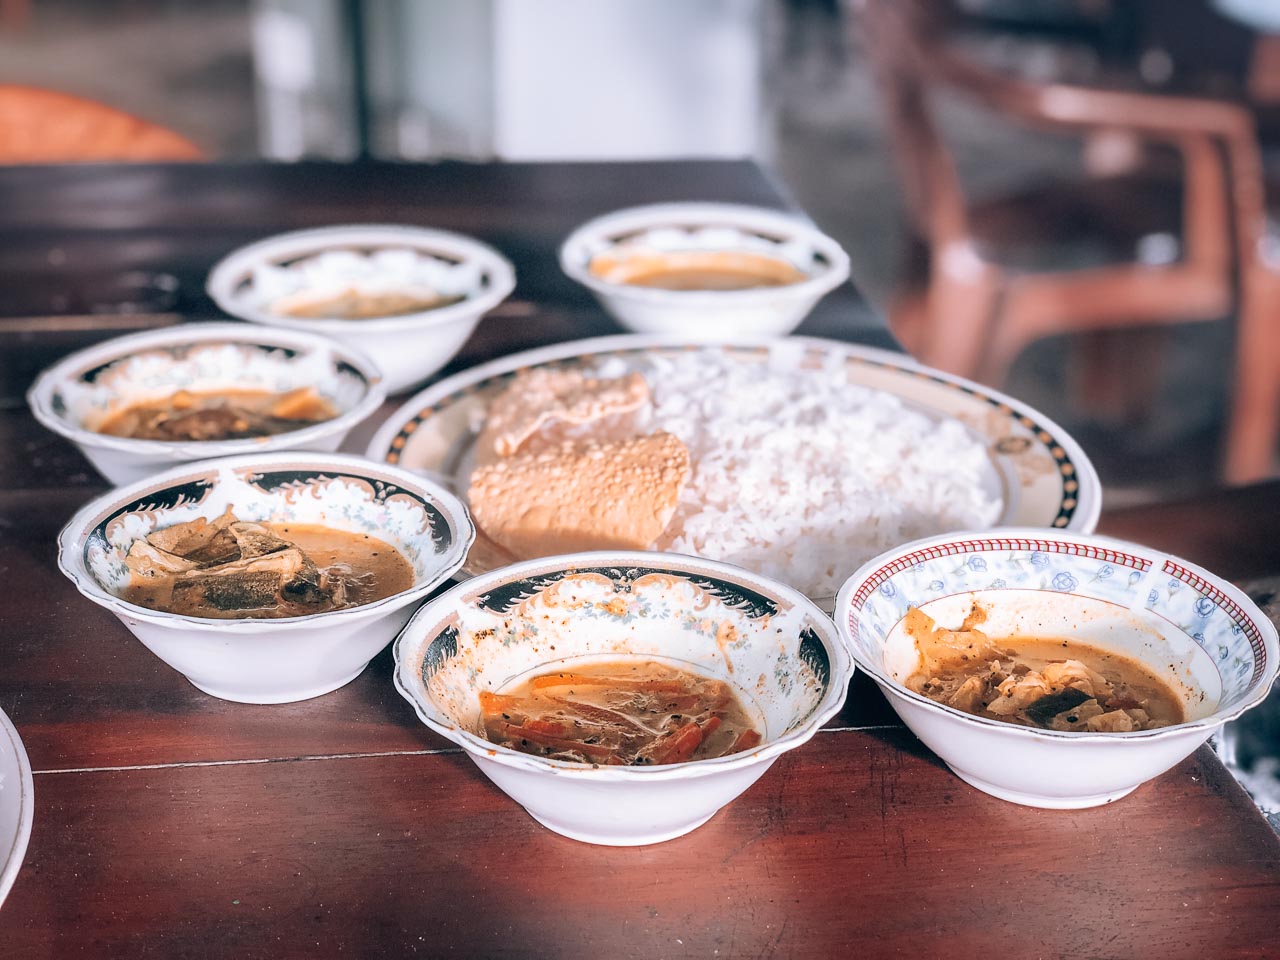 Best Things To Do In Sri Lanka - eat 10 curries for 12 dollar